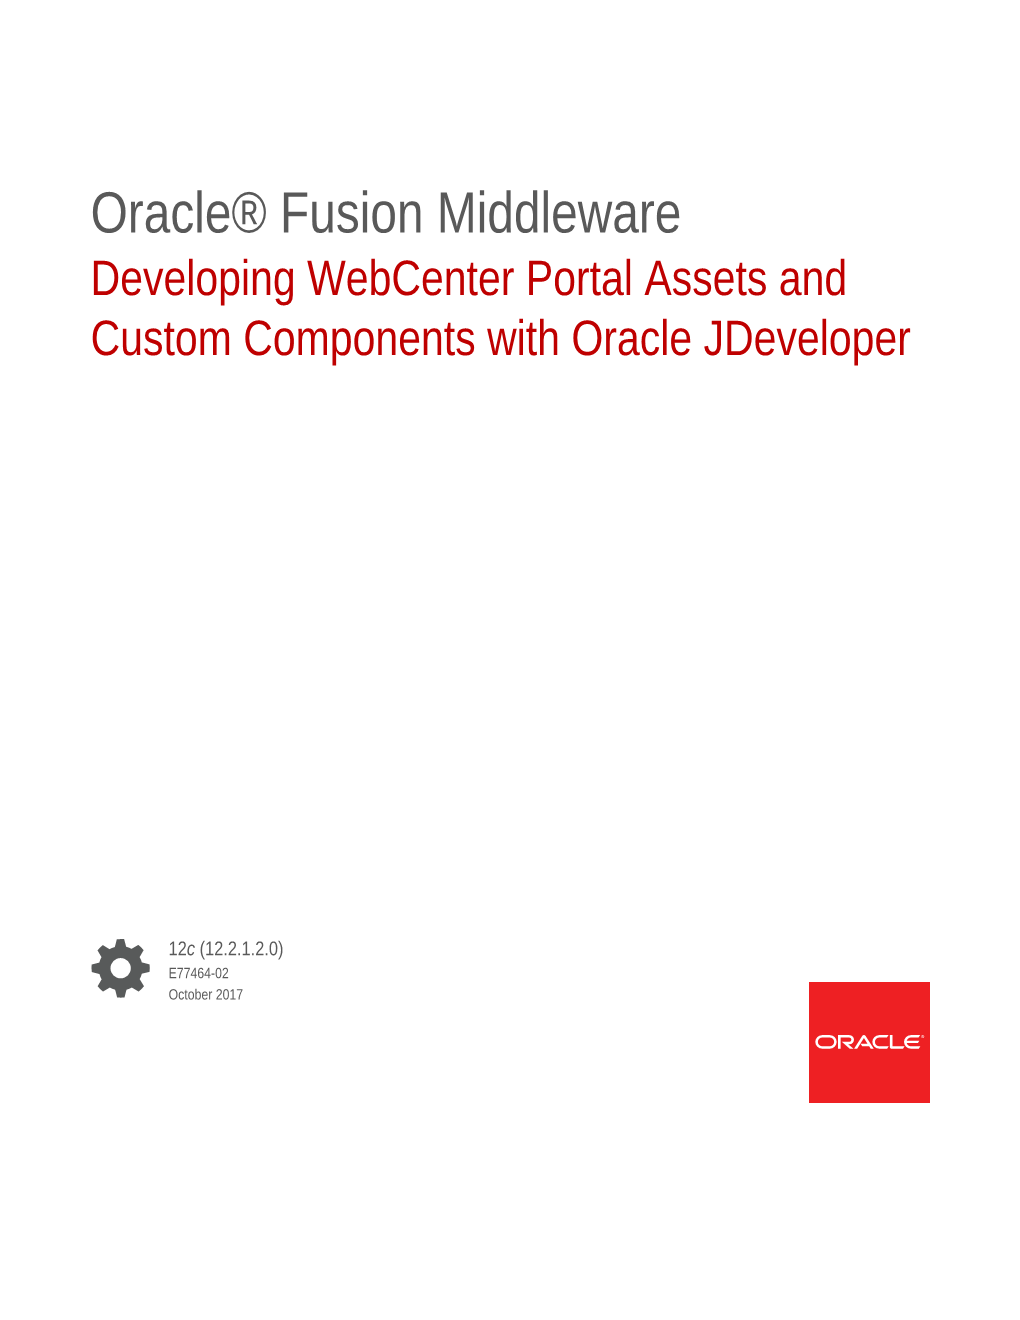 Developing Webcenter Portal Assets and Custom Components with Oracle Jdeveloper